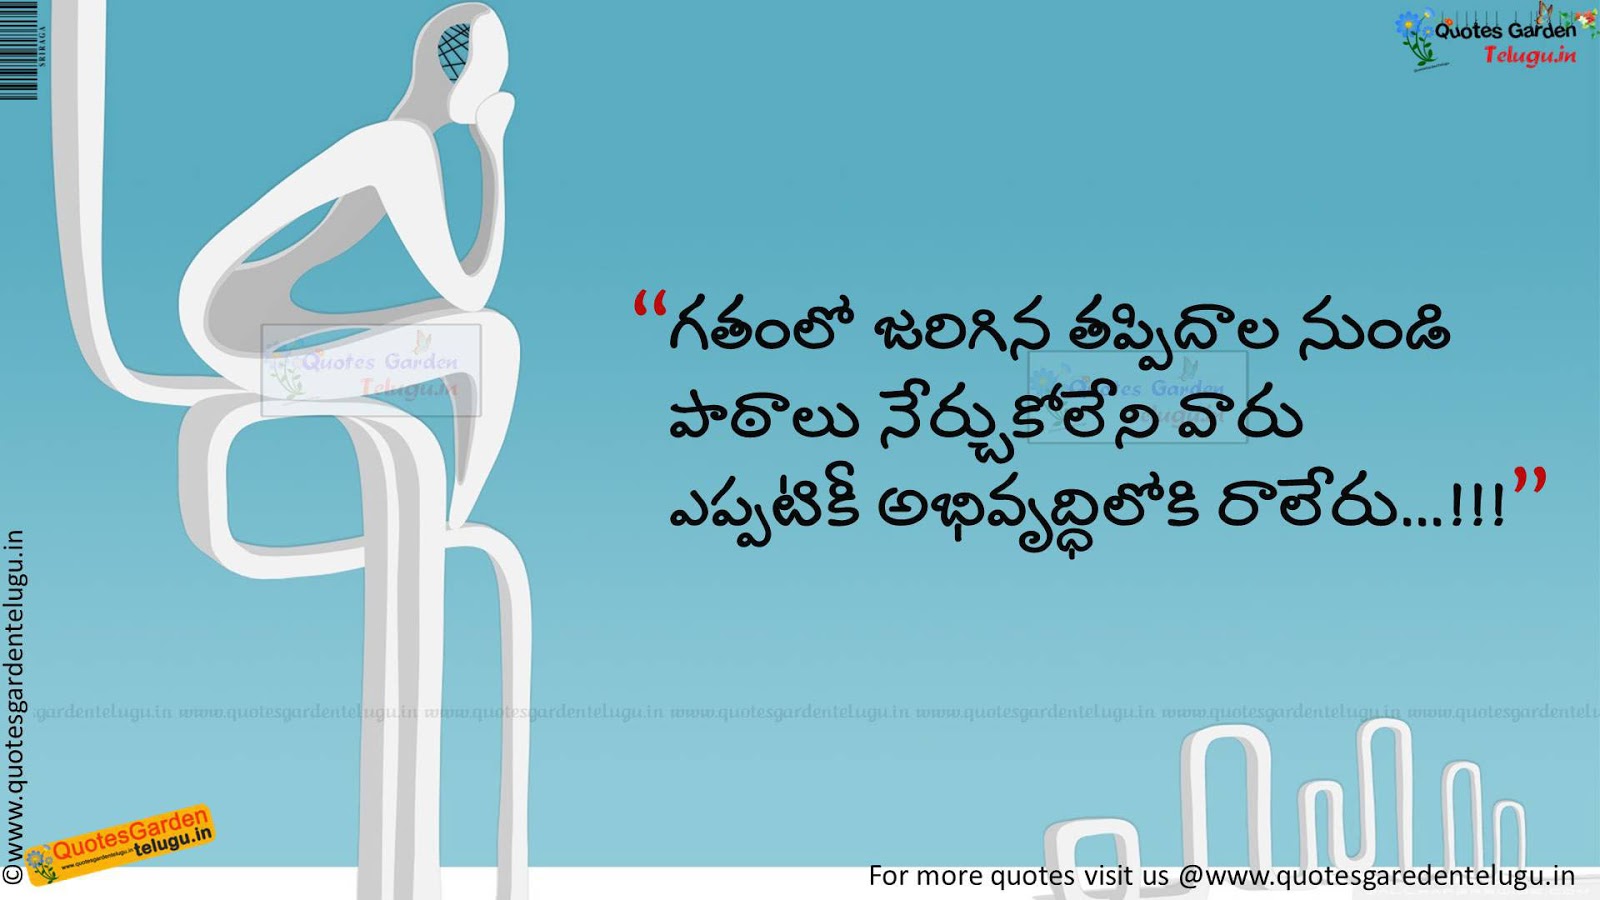 Lessons learned in life quotes in telugu | QUOTES GARDEN TELUGU ...